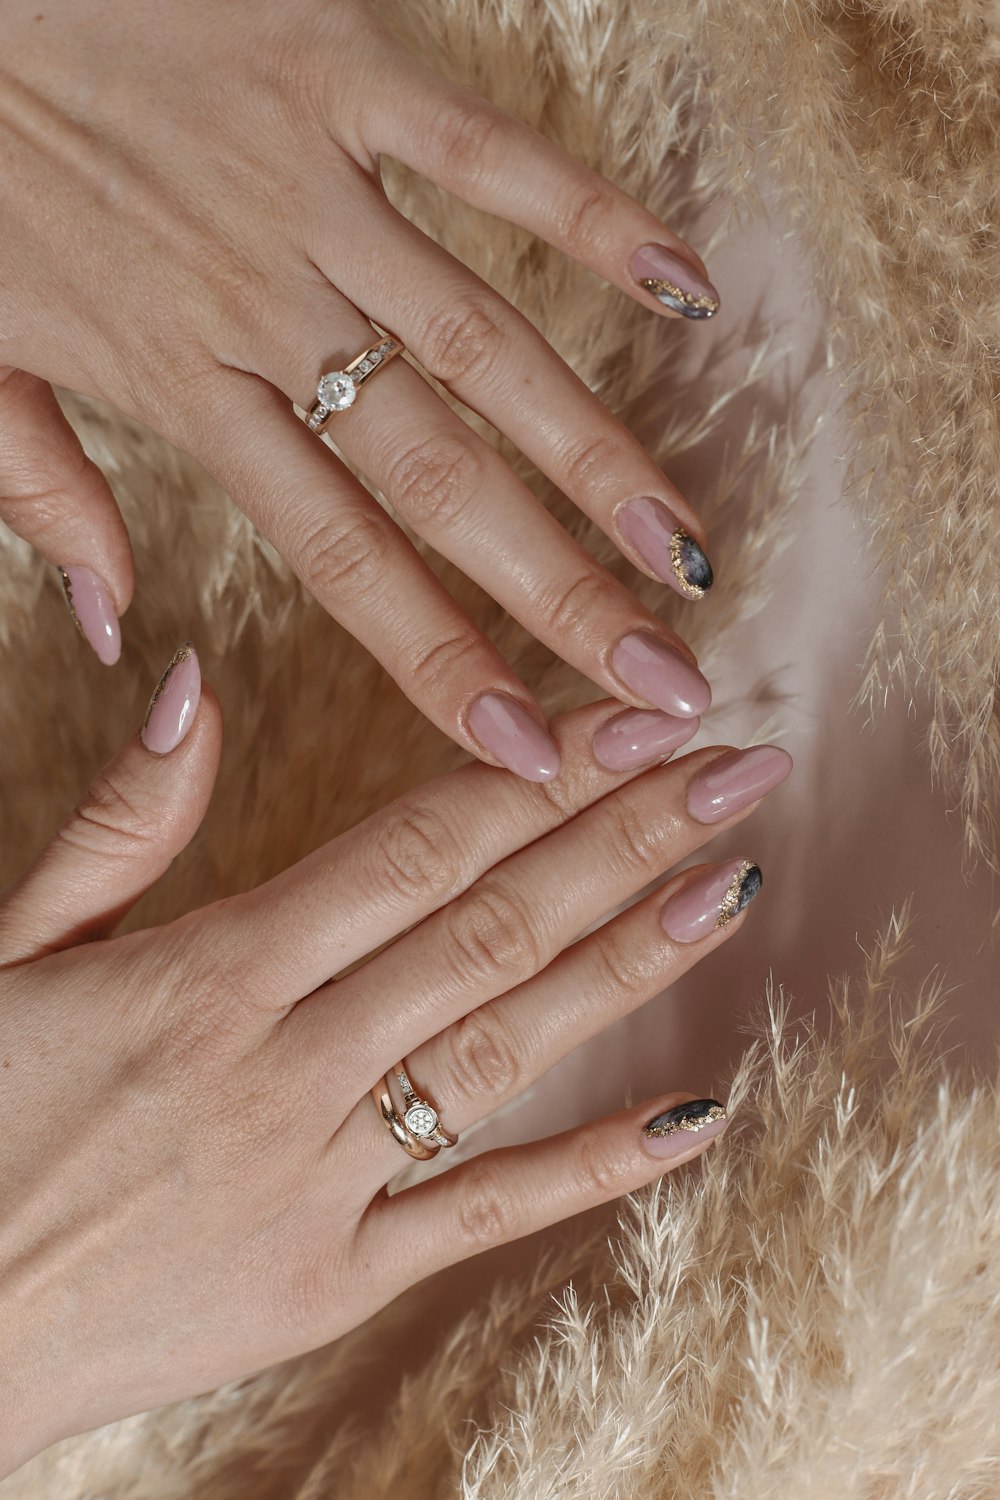 a woman's hands with manicured nails and a ring